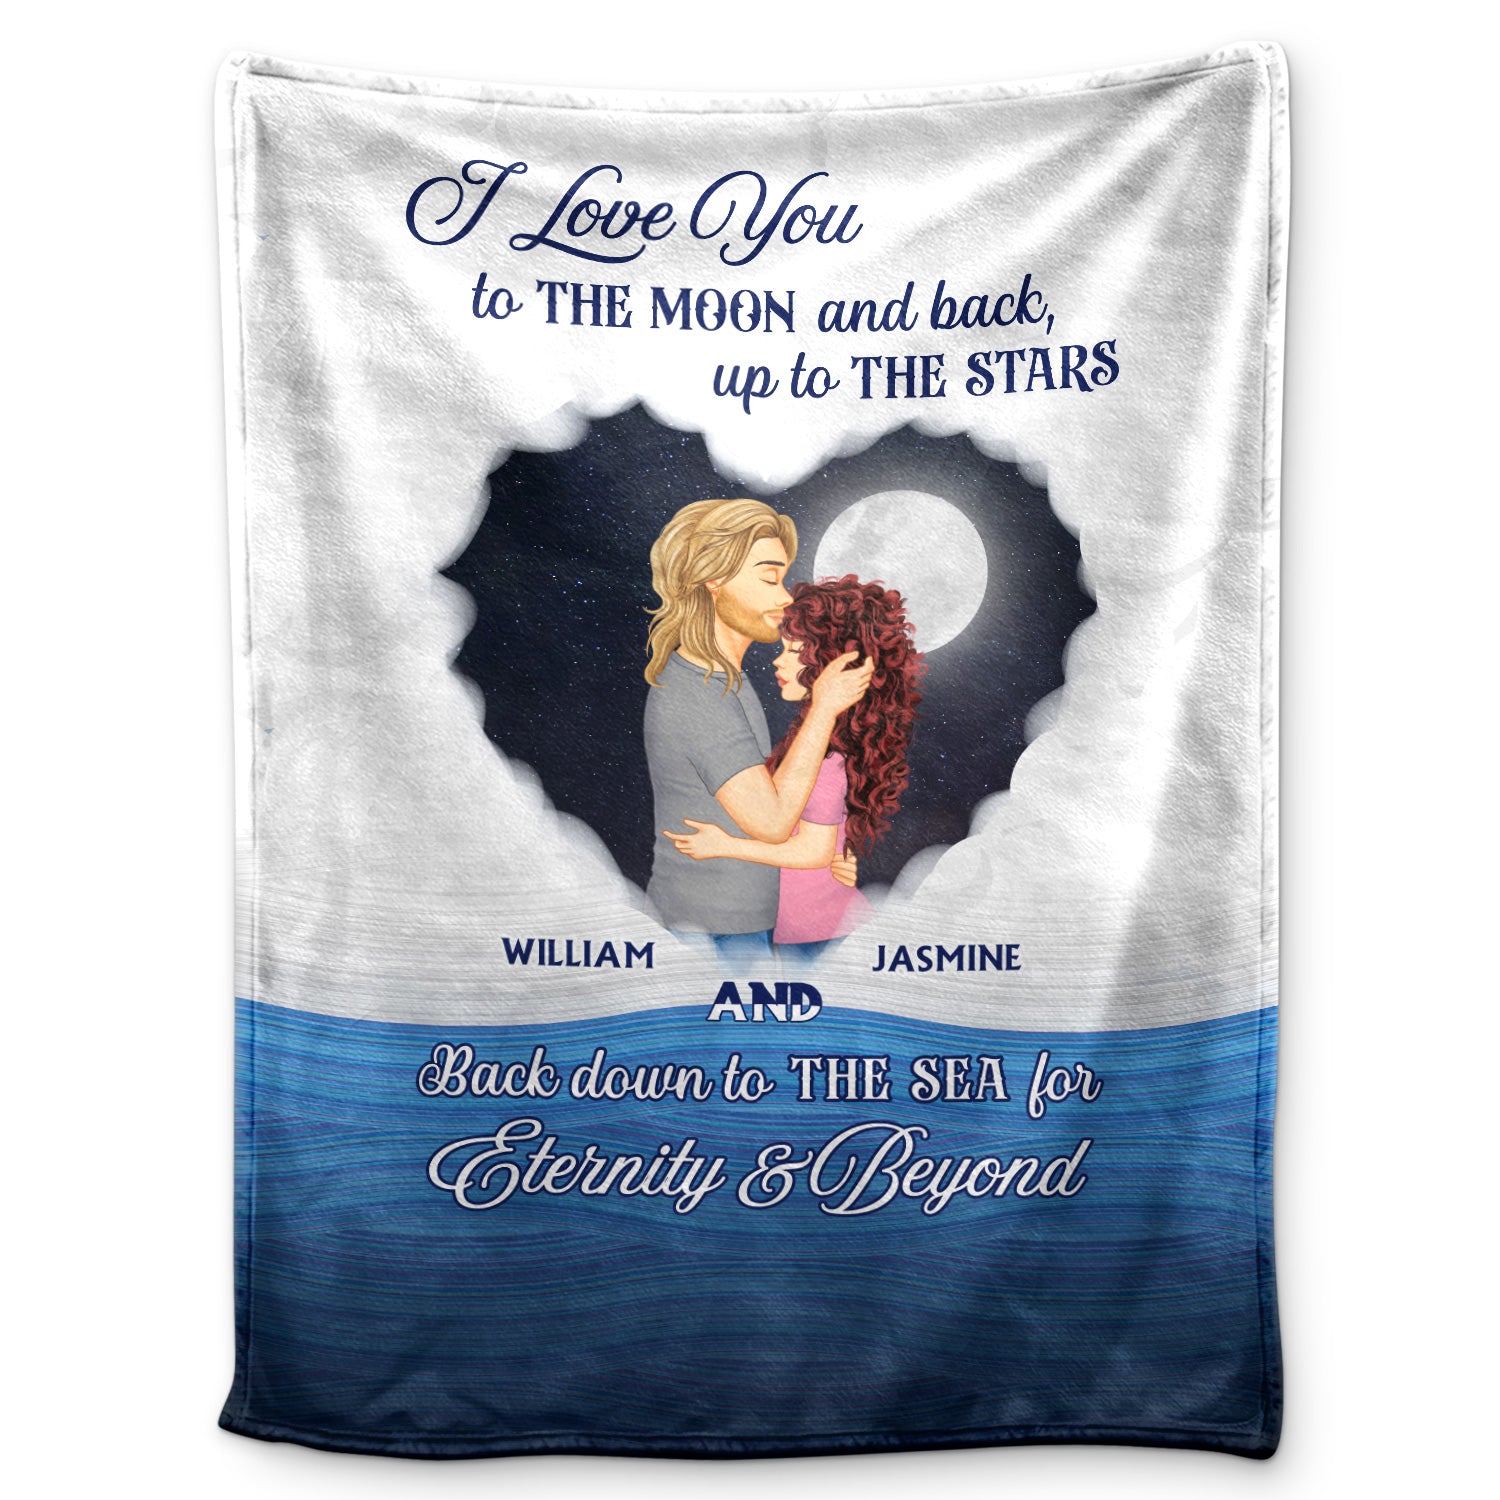 Up To The Stars - Gift For Couples - Personalized Fleece Blanket